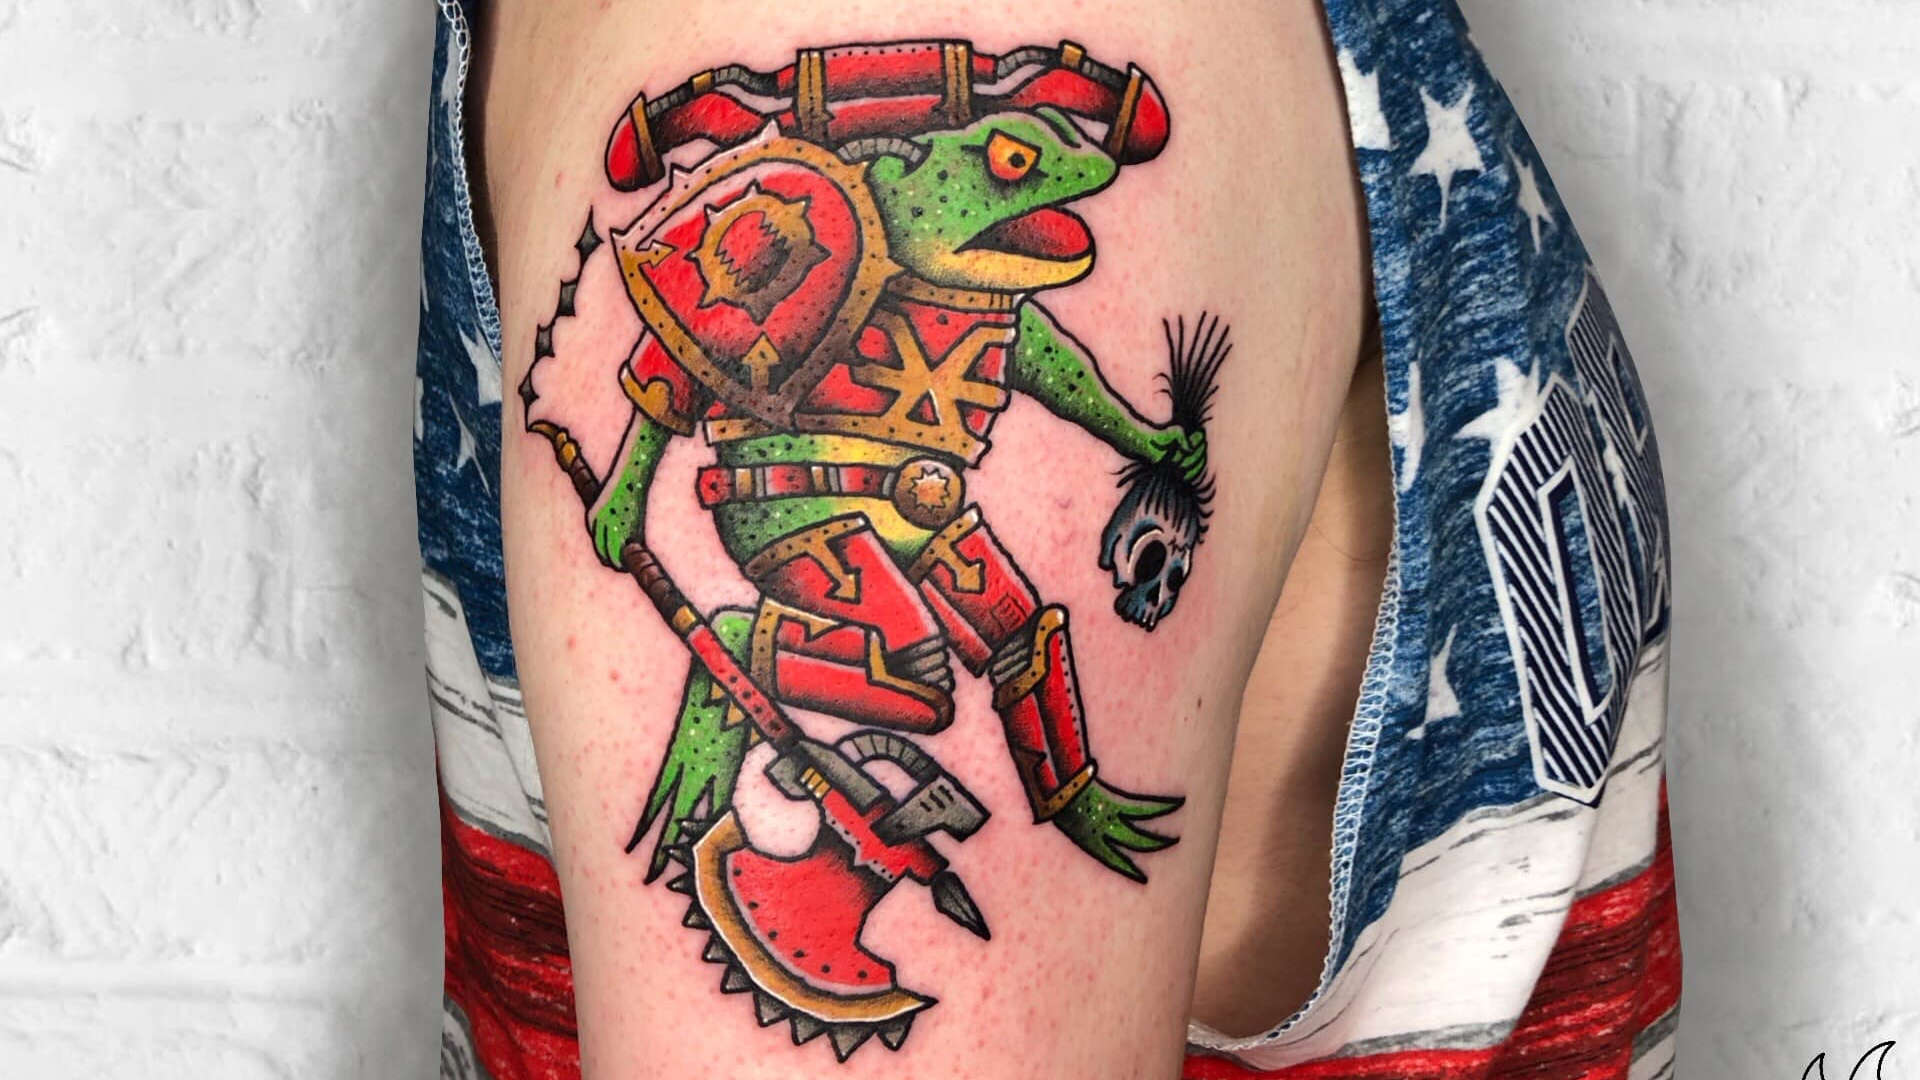 American Traditional Tattoos The History Behind the Art